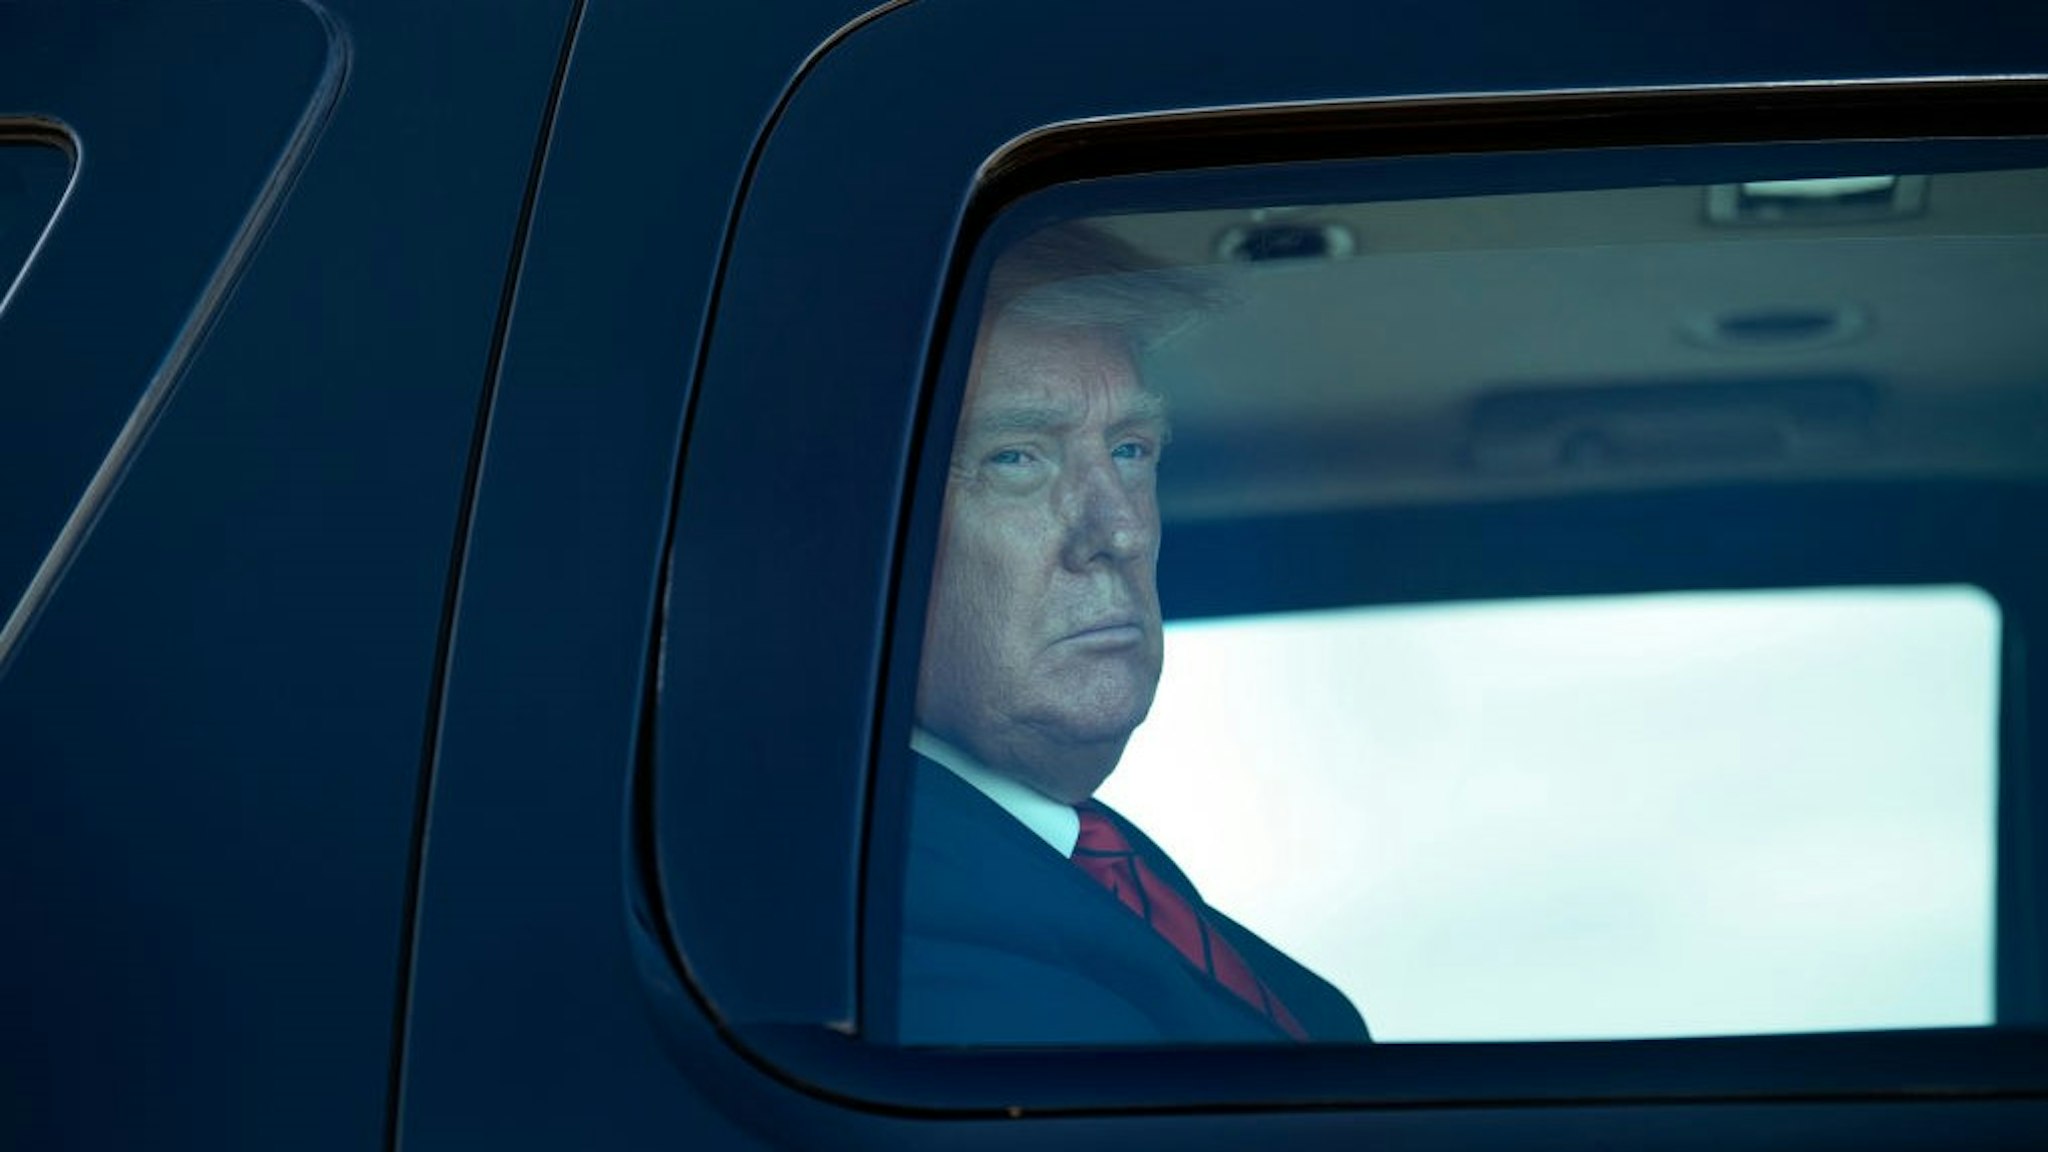 US President Donald Trump arrives in a motorcade before boarding Air Force One at Joint Base Andrews in Maryland on September 12, 2020. - Trump travels to Nevada and Arizona for campaign events. (Photo by Brendan Smialowski / AFP) (Photo by